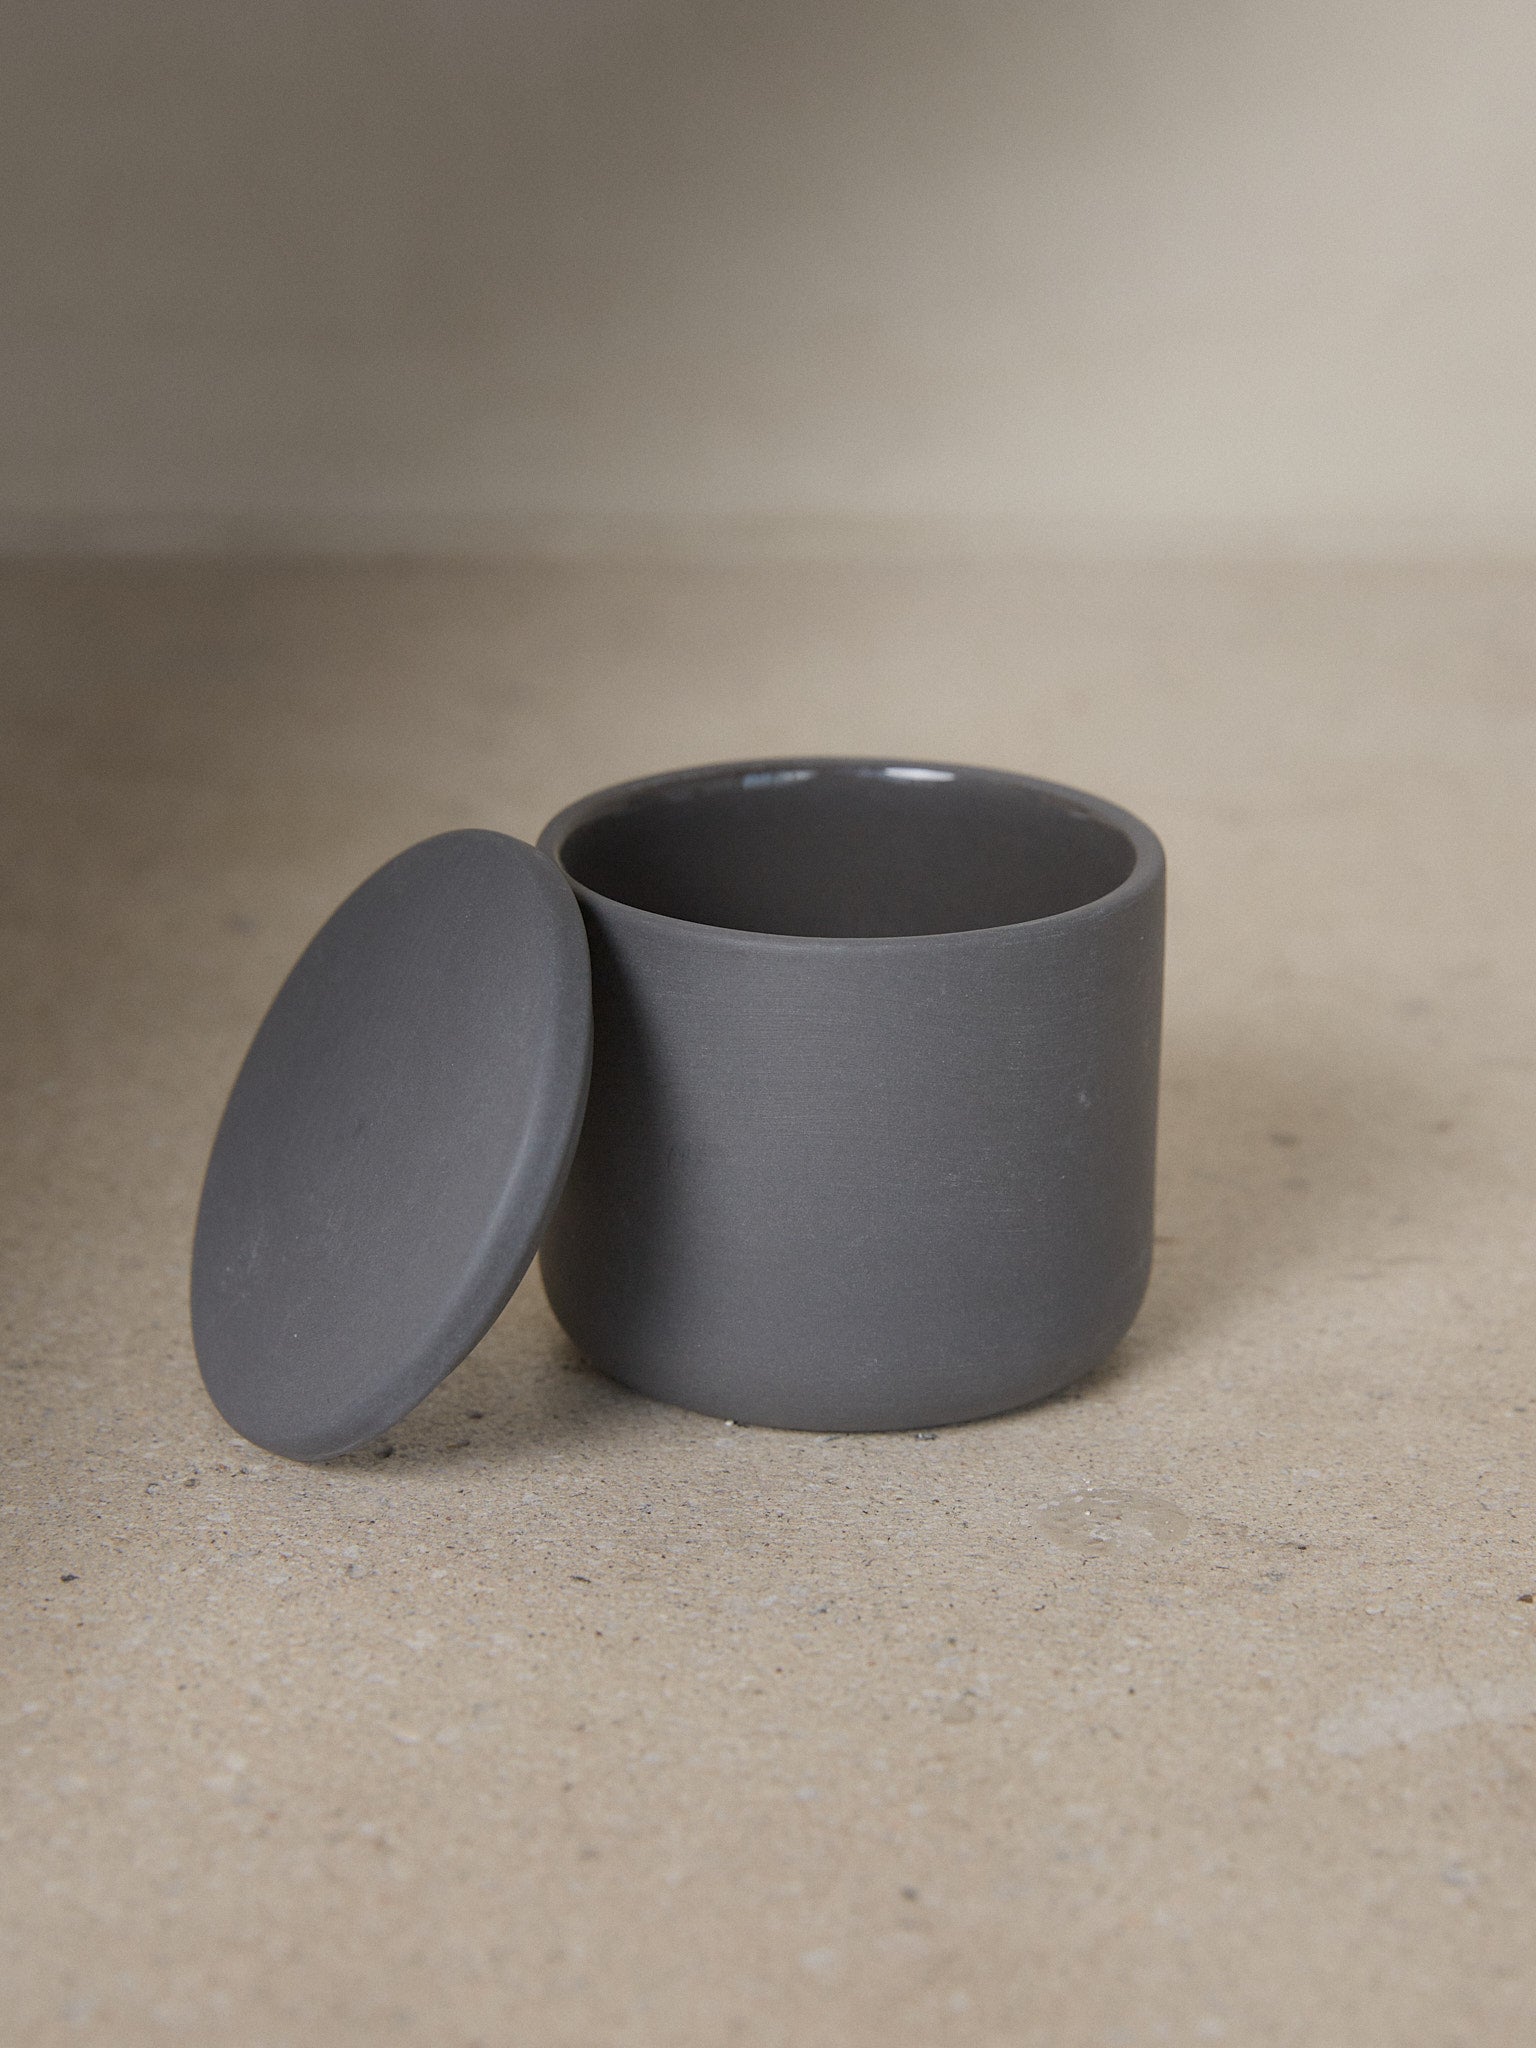 Dark Grey Round Cose Box. A study in refined simplicity, the Round Cose Box by Bertrand Lejoly for Serax adds subtle luxury to any bathroom or kitchen.